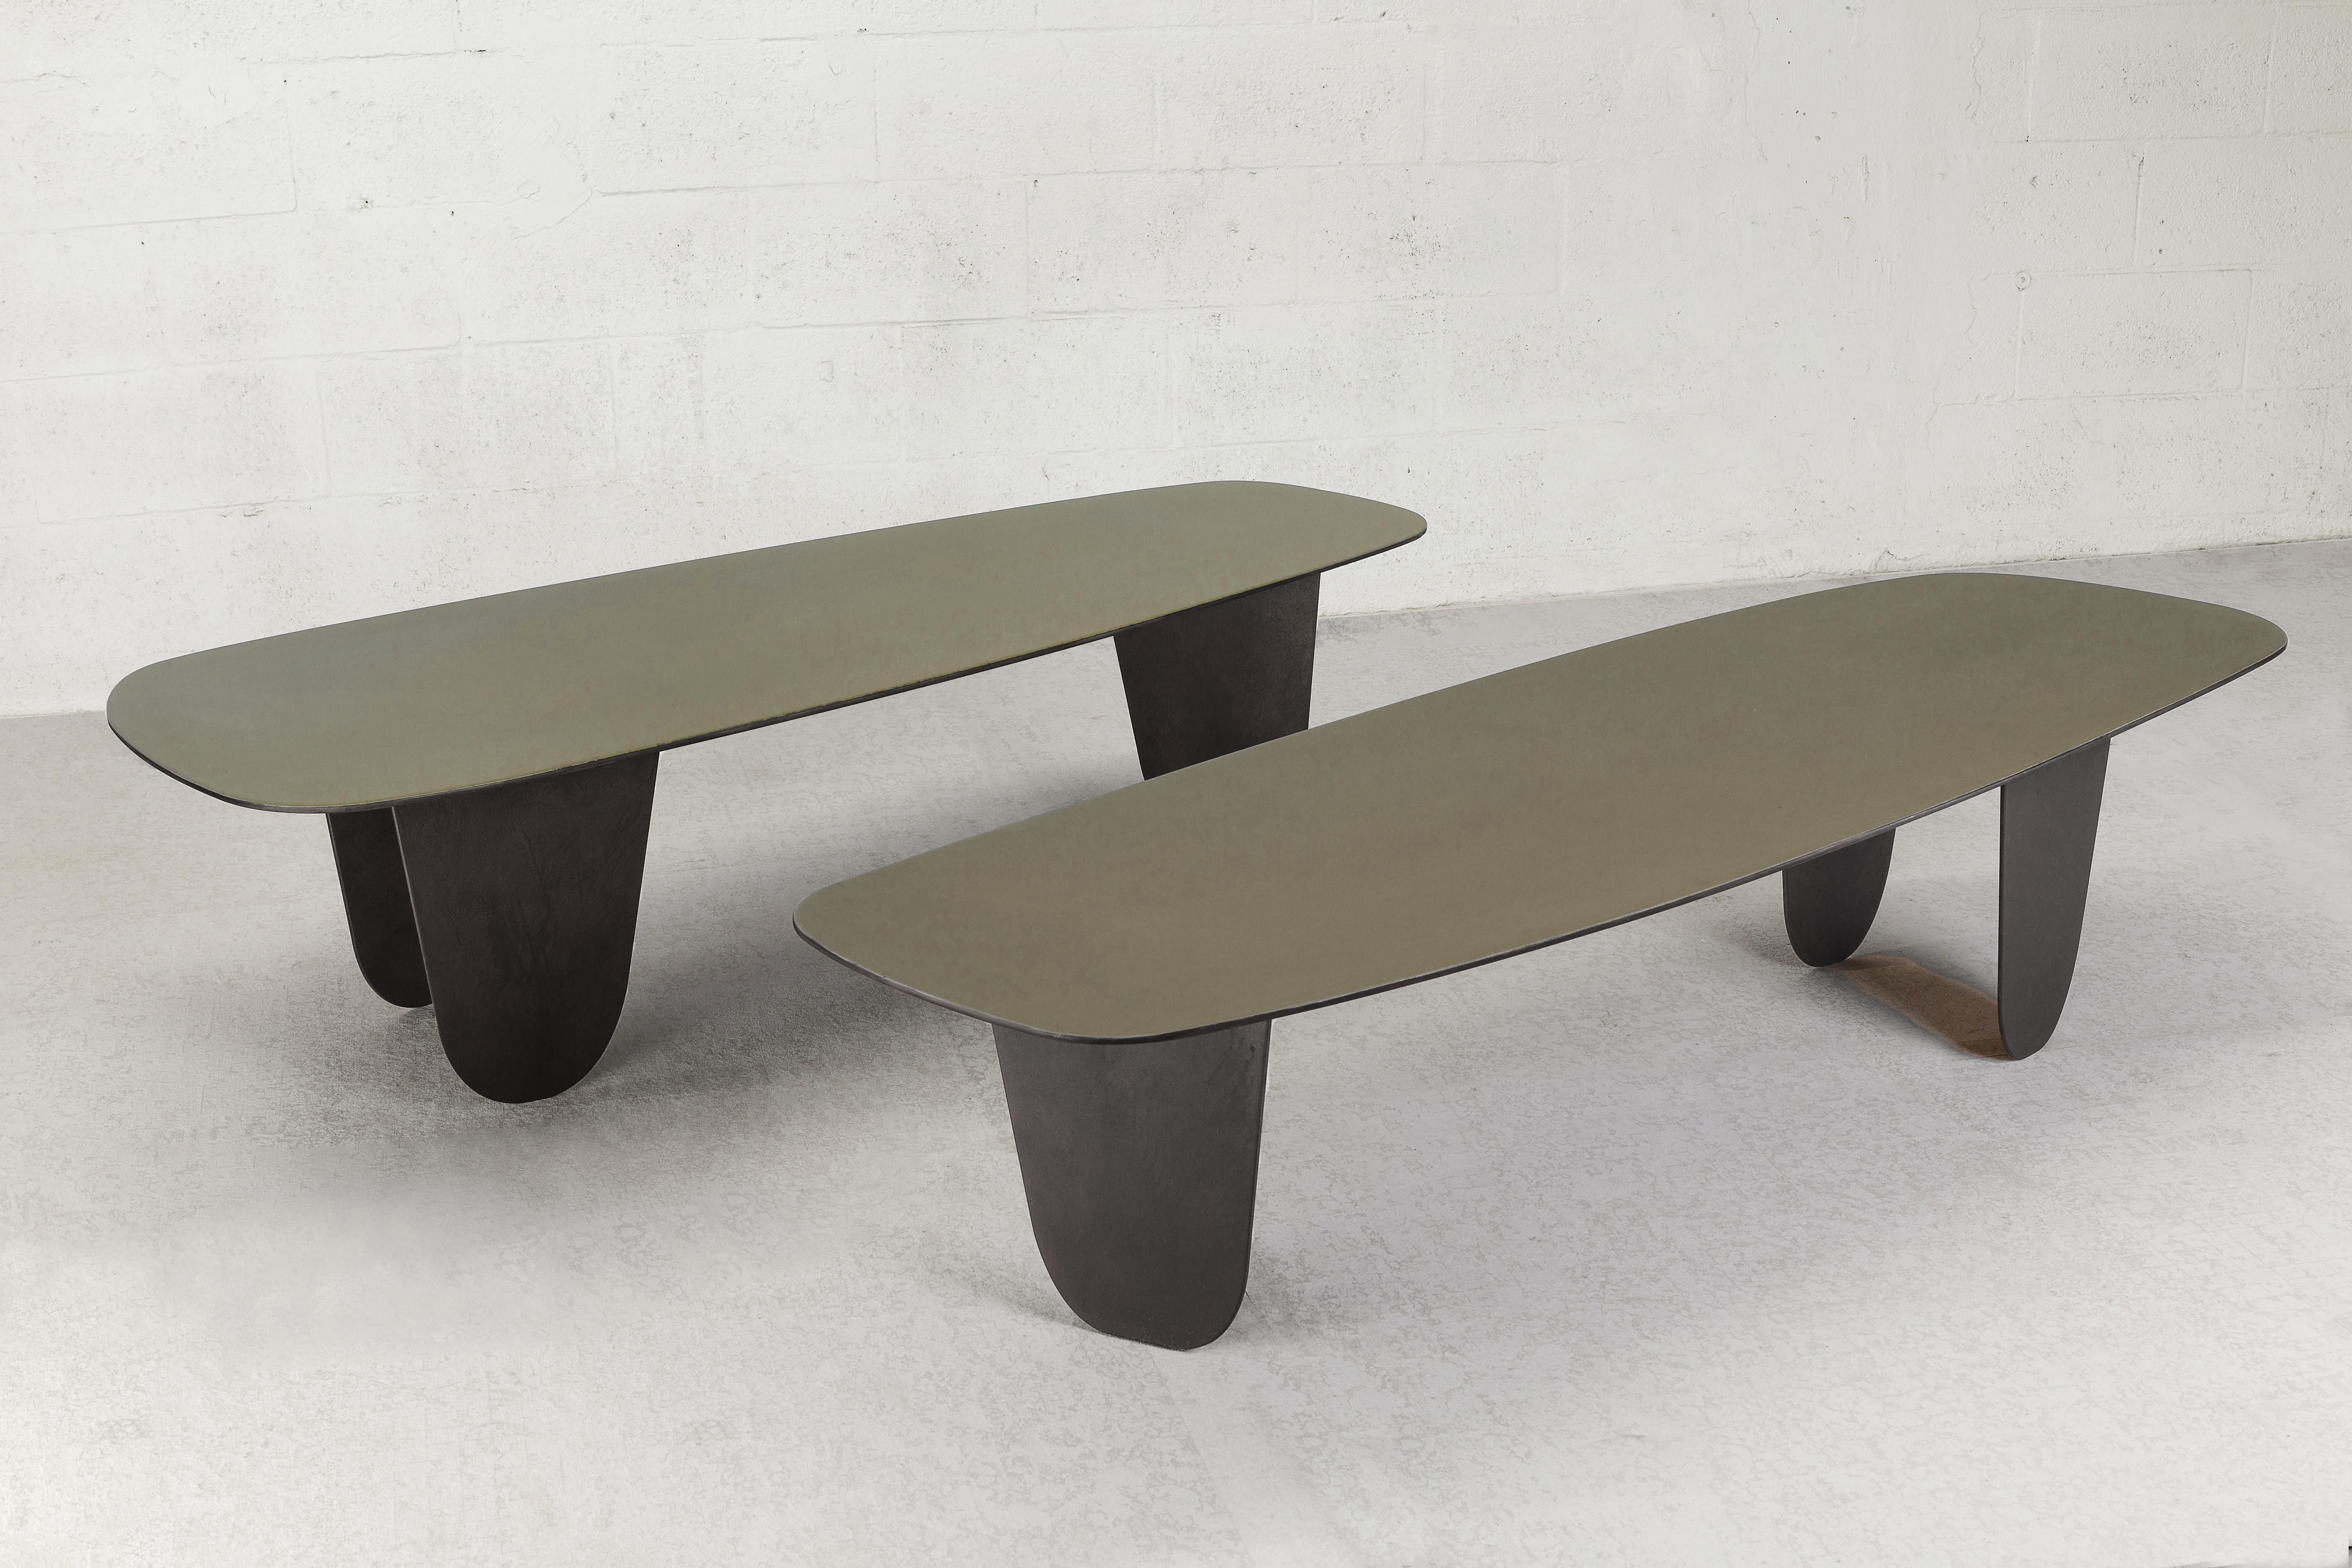 Contemporary Freeform Minimalist Steel and Resin Low Tables by Vivian Carbonell (amerikanisch) im Angebot